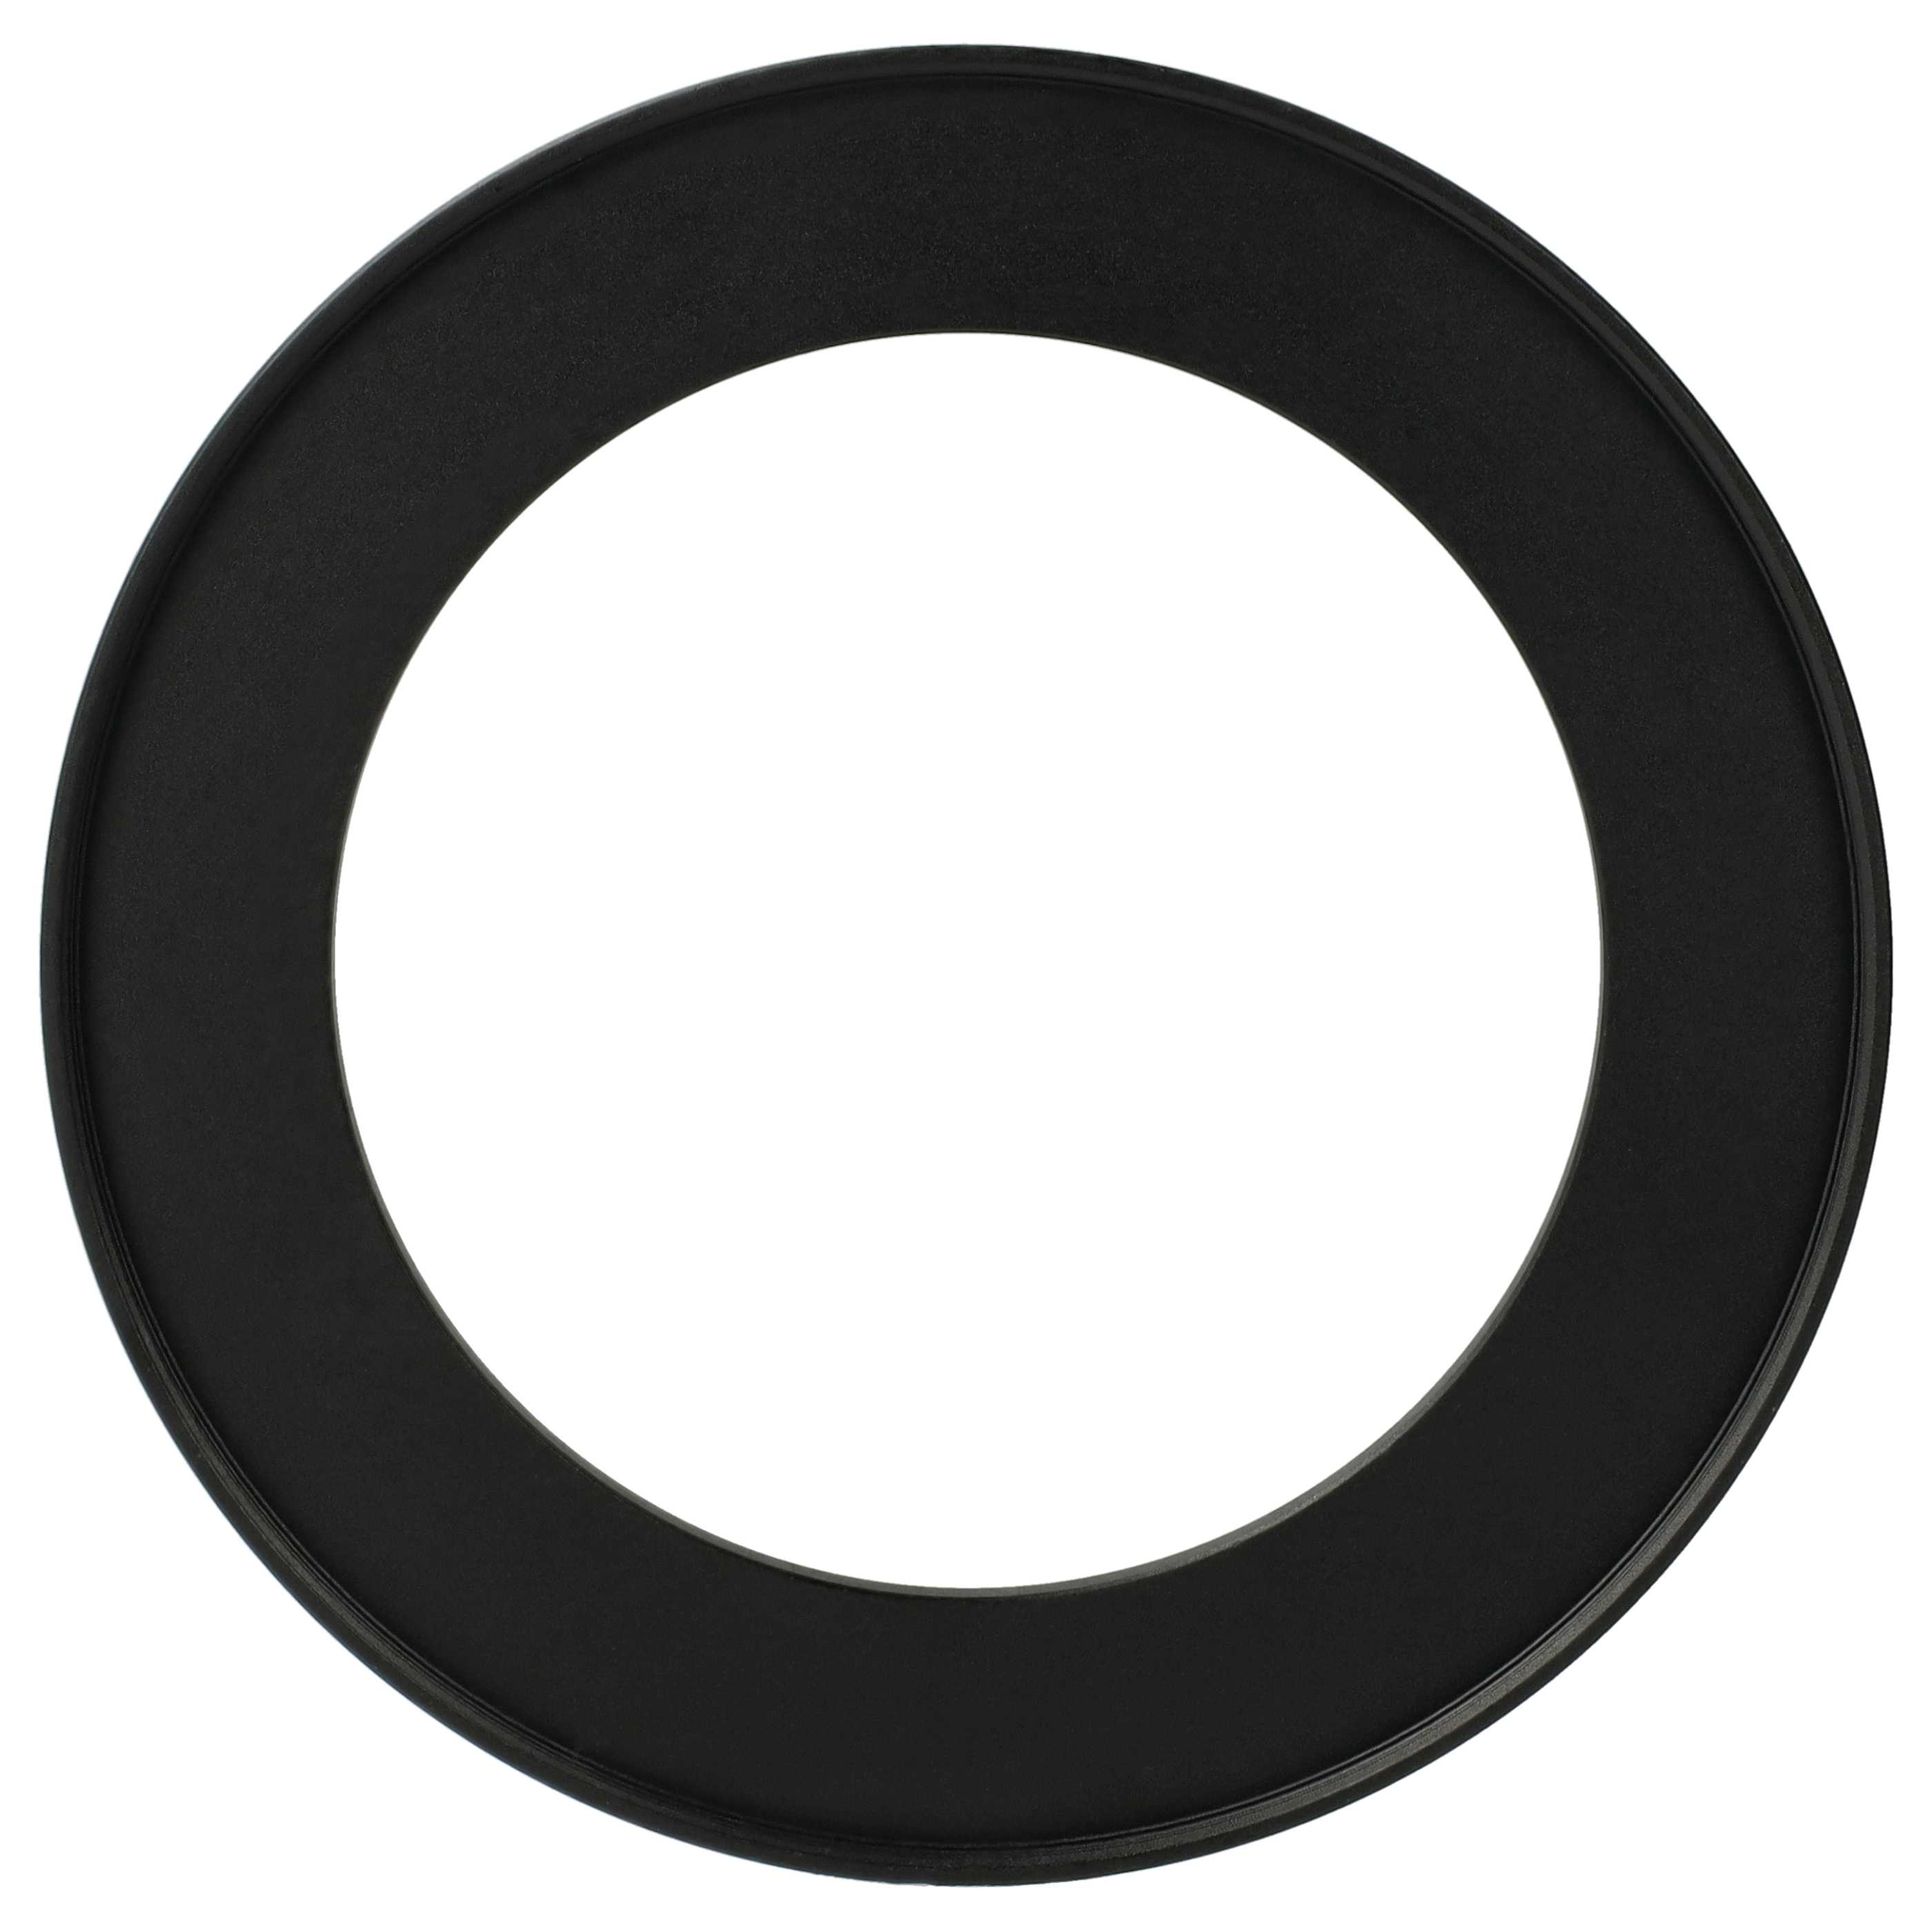 Step-Up Ring Adapter of 77 mm to 105 mmfor various Camera Lens - Filter Adapter